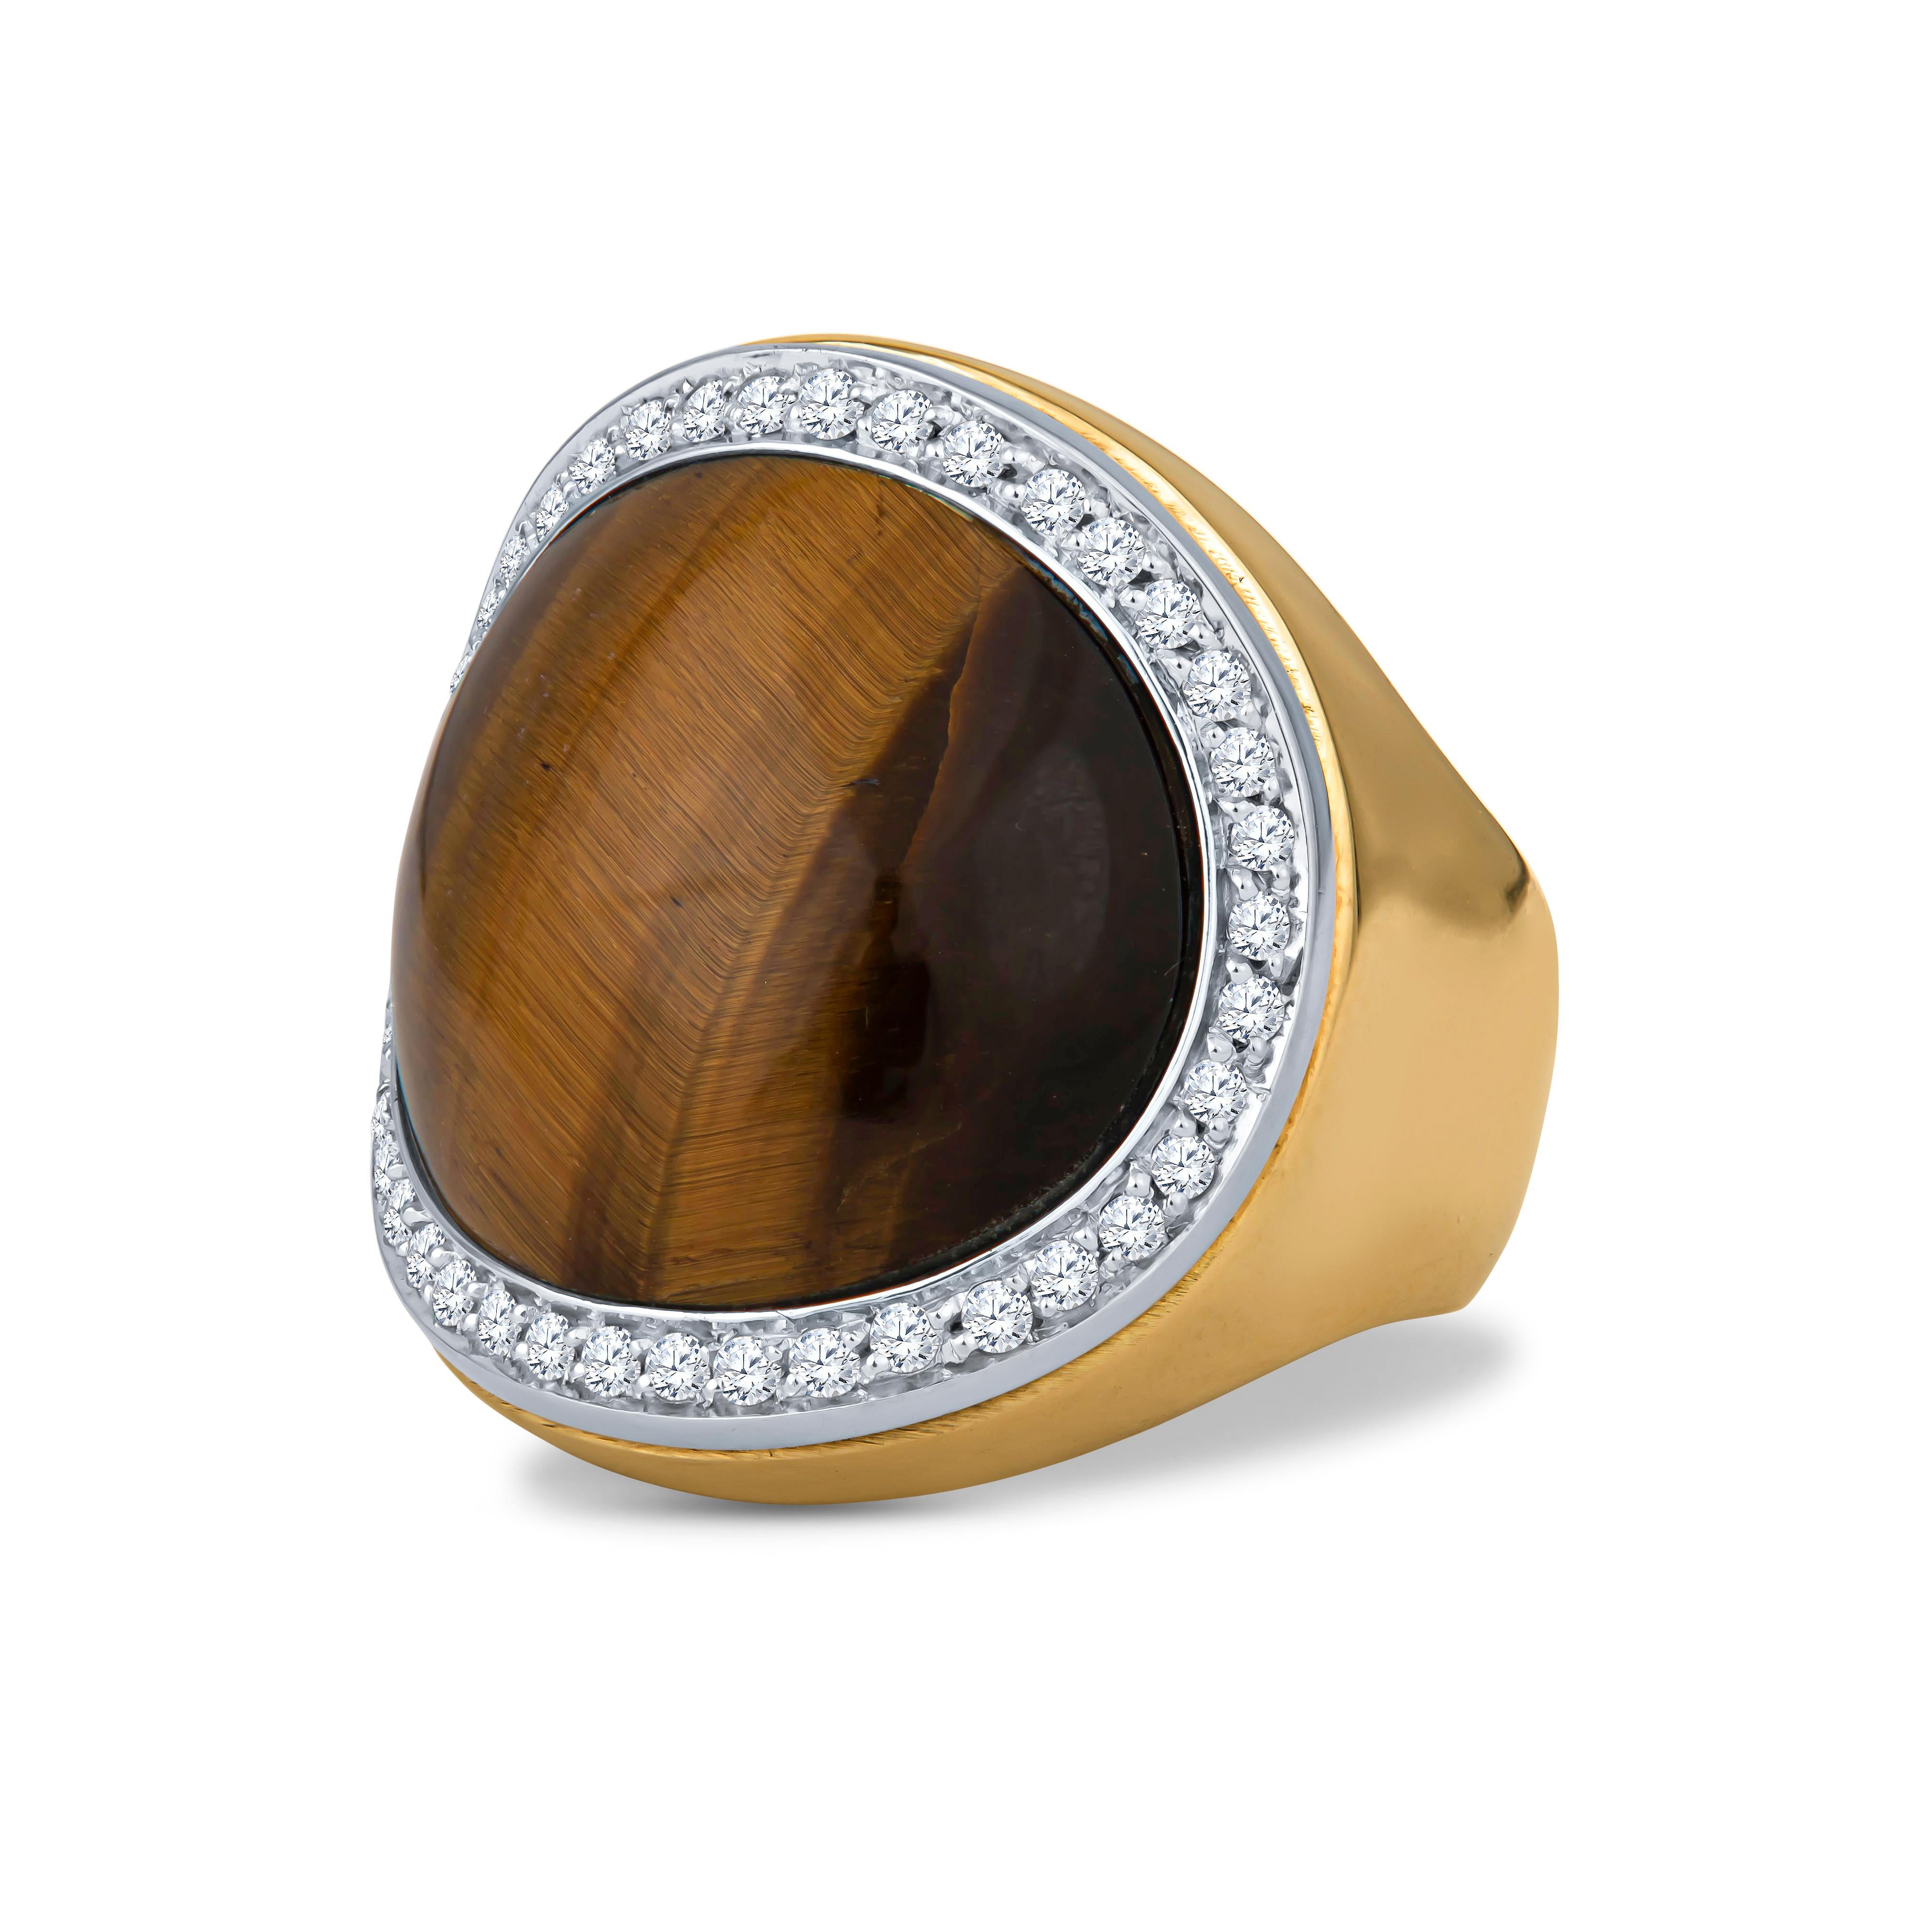 This Roberto Coin ring is made of 18kt yellow gold, with tiger's eye quartz surrounded by a round diamond halo. It's inscribed 